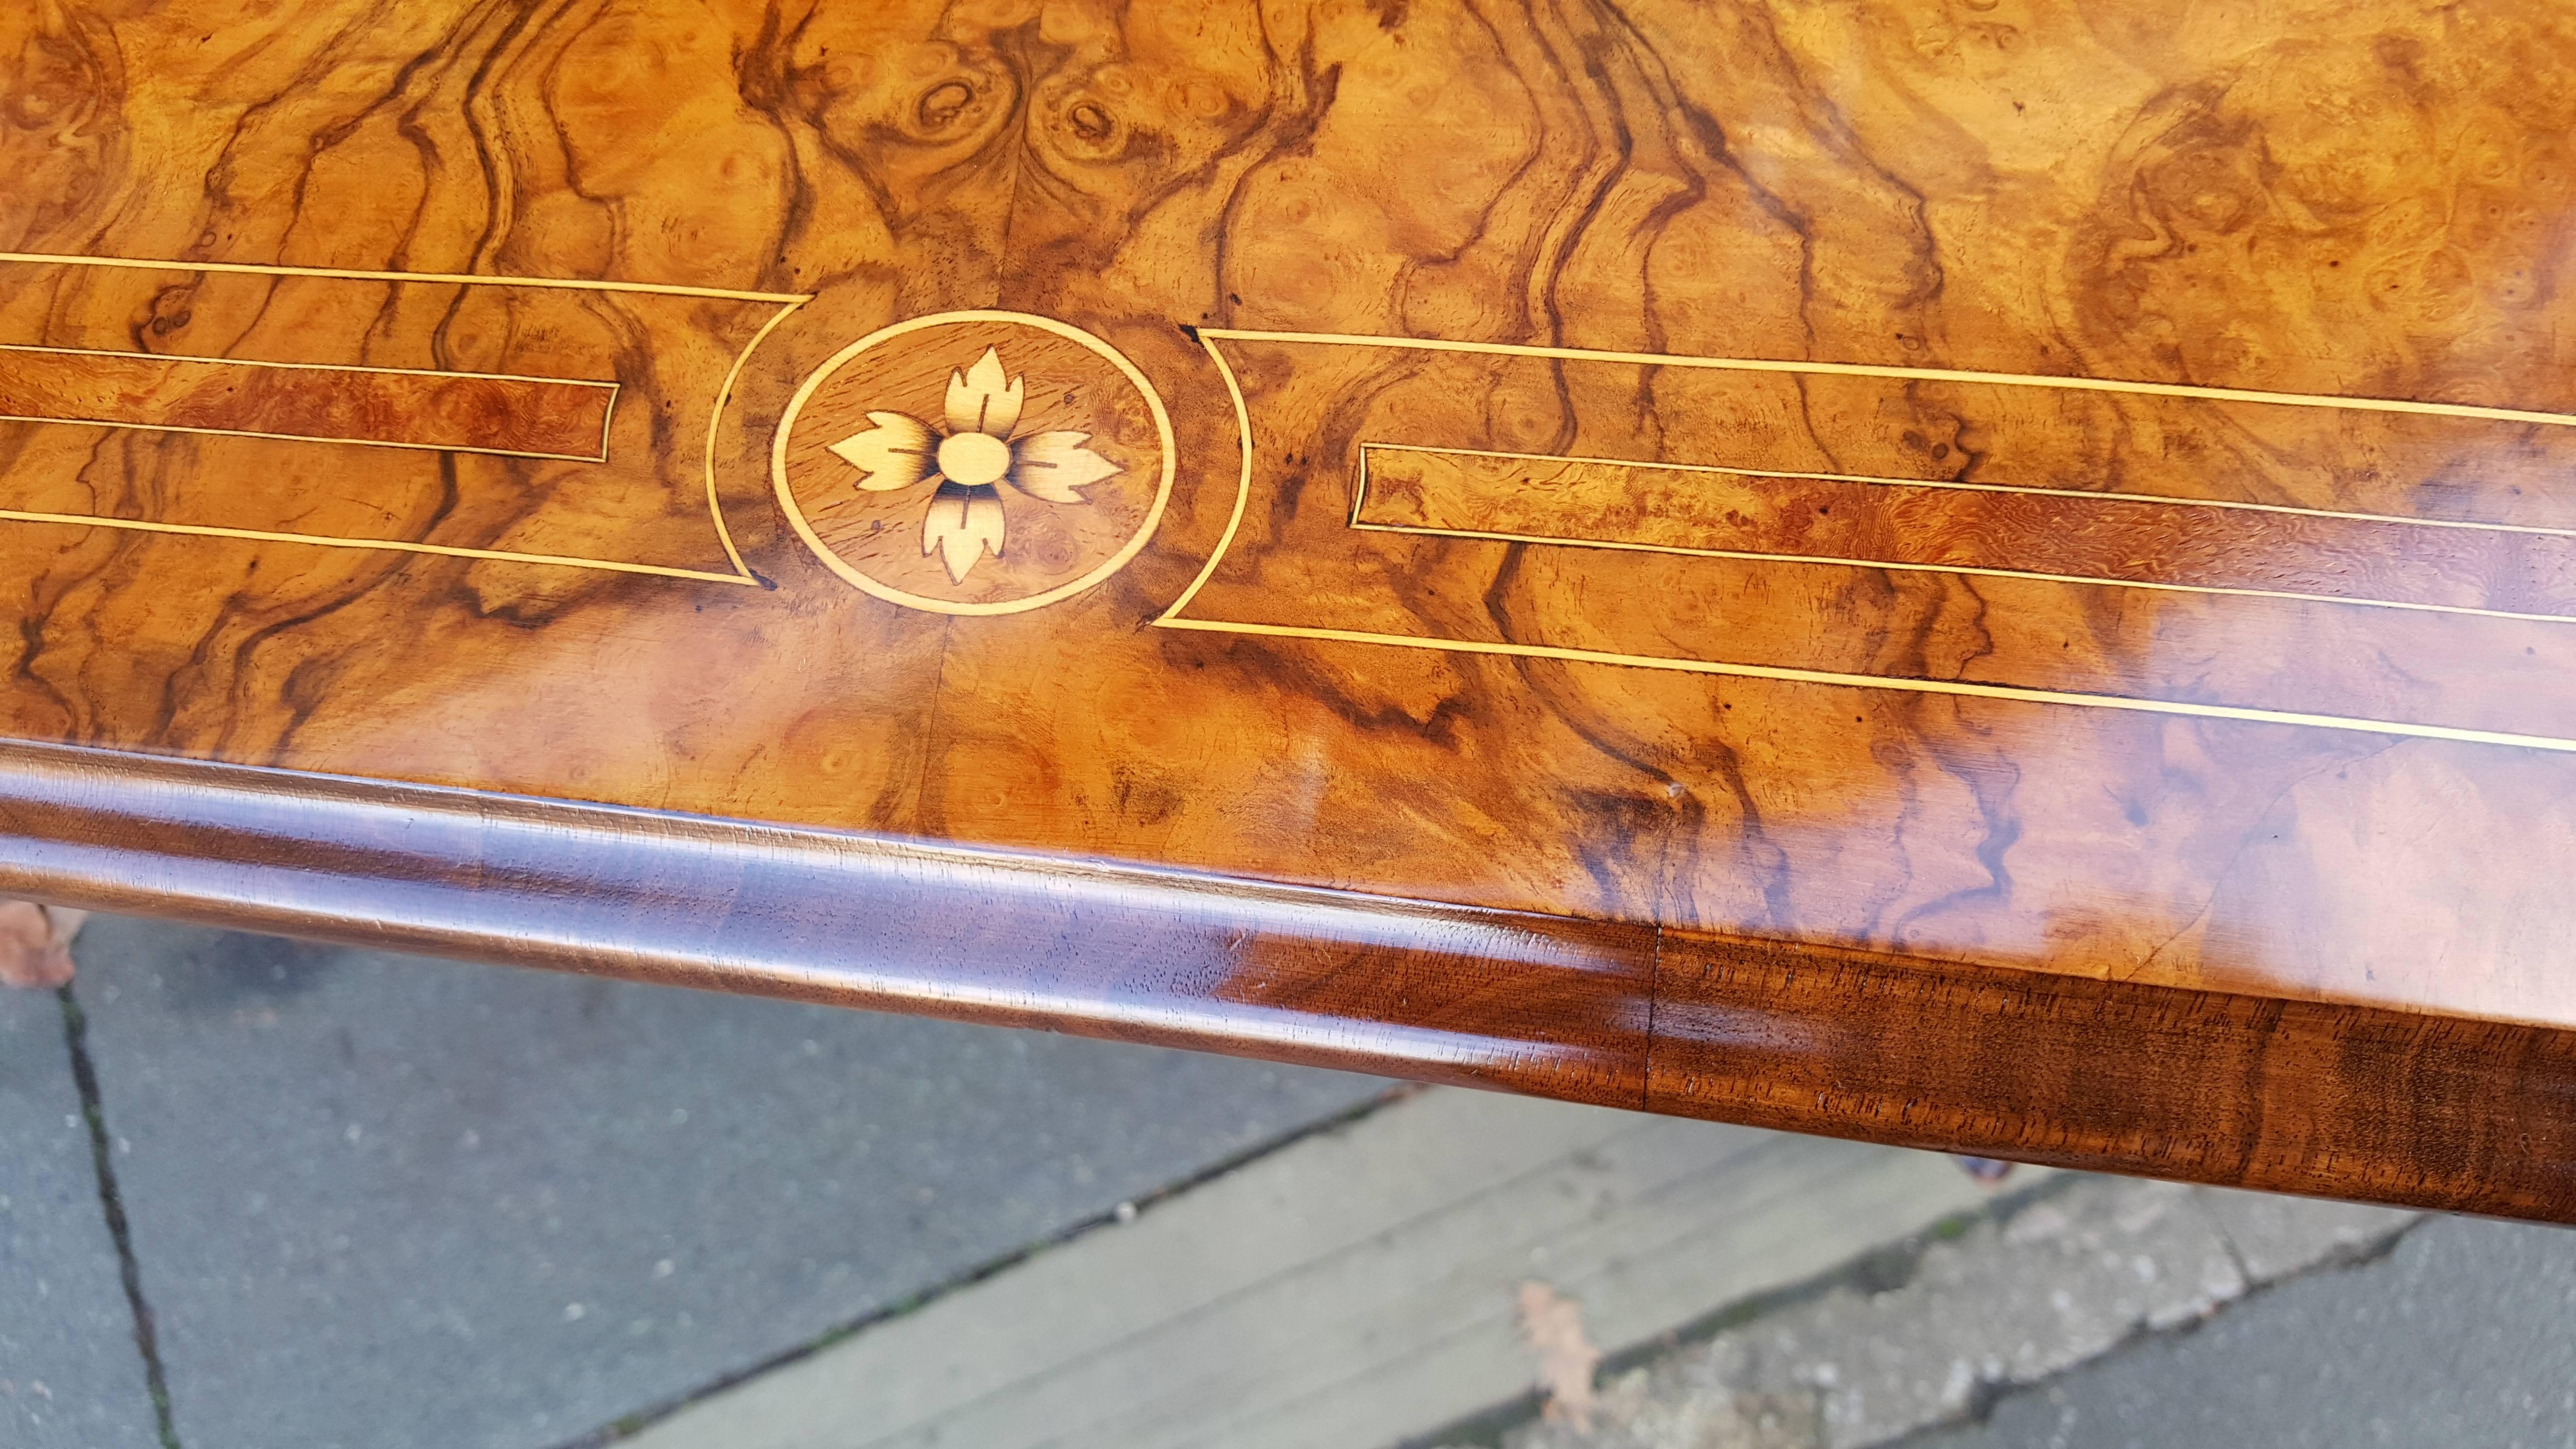 High Victorian burr walnut card table with quarter veneered top Inlaid with satinwood and rosewood, turned pillaster supports on sabre legs and pad feet with porcelain castors.
Measures: 38